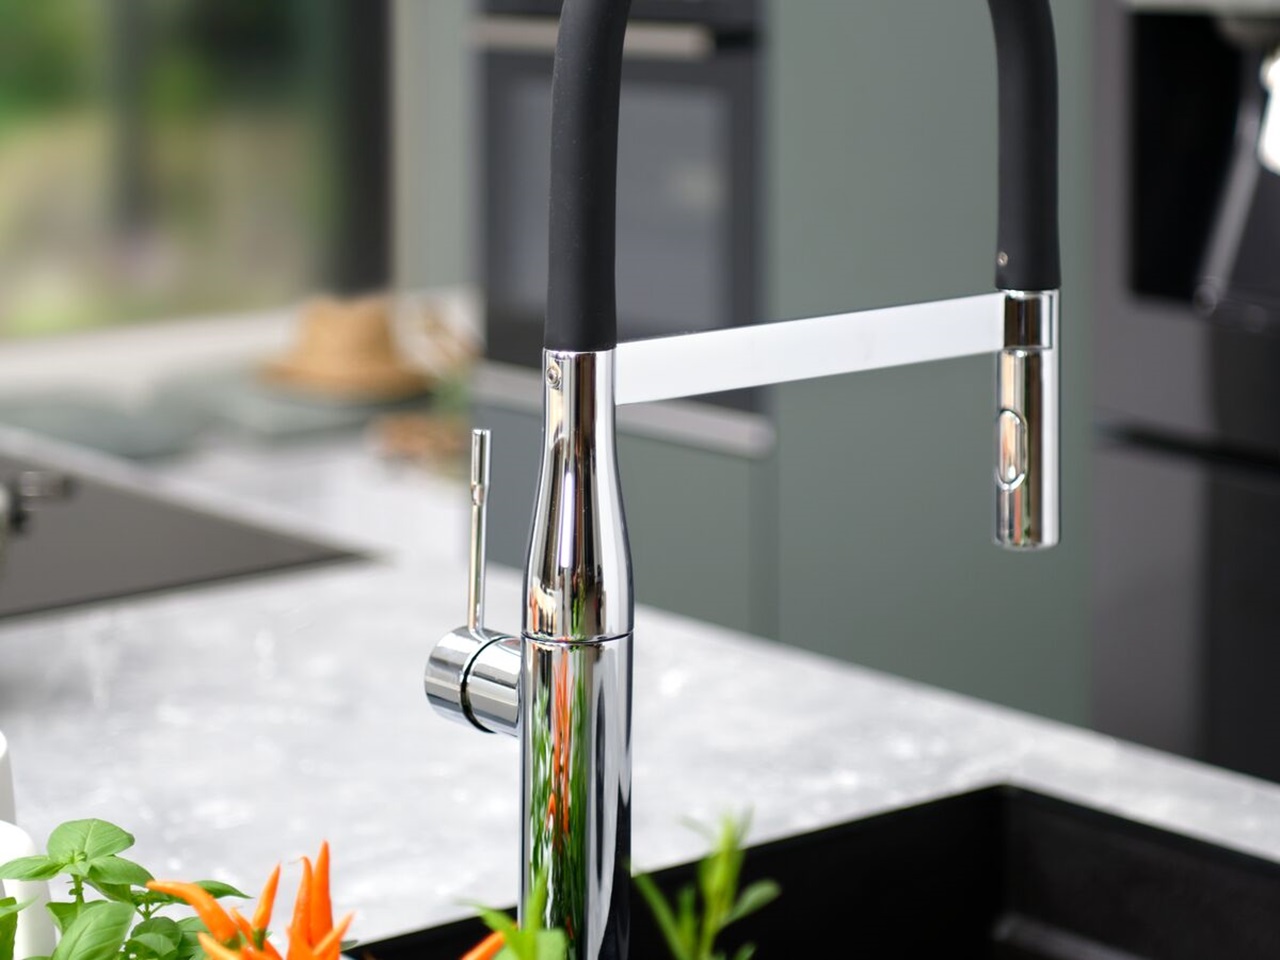 Black and chrome rounded spray-type mixer tap